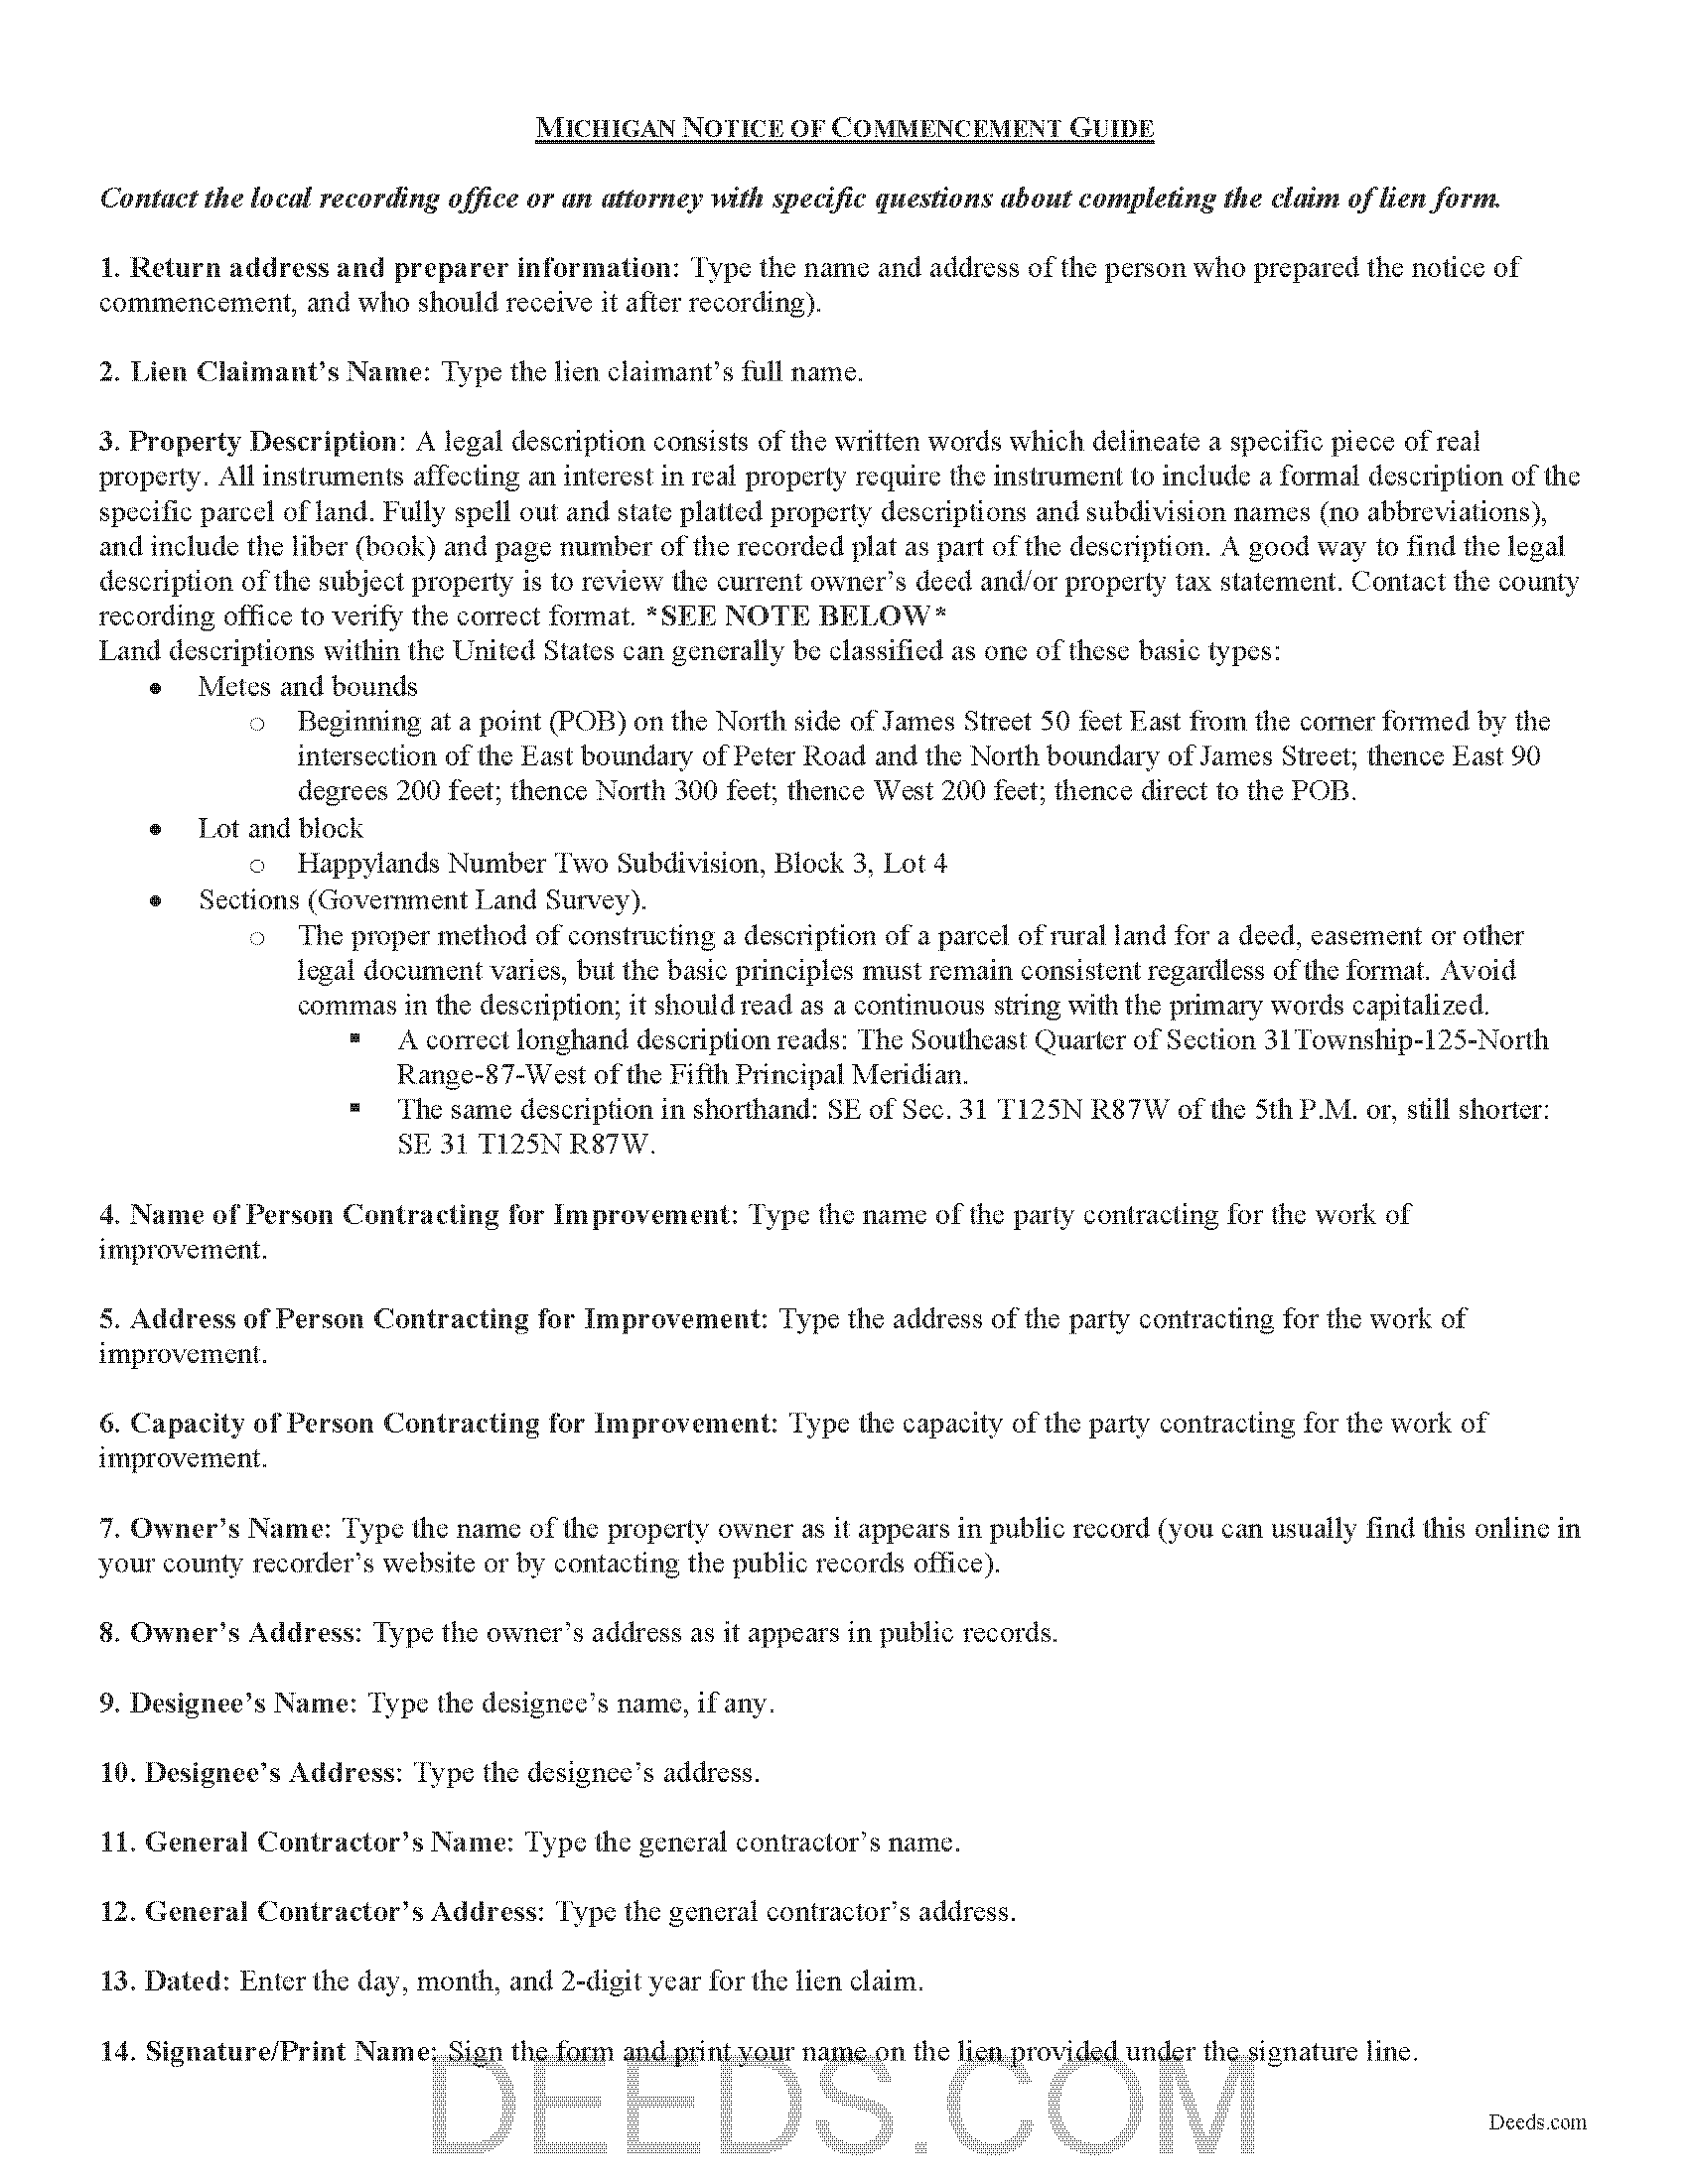 Notice of Commencement Guide